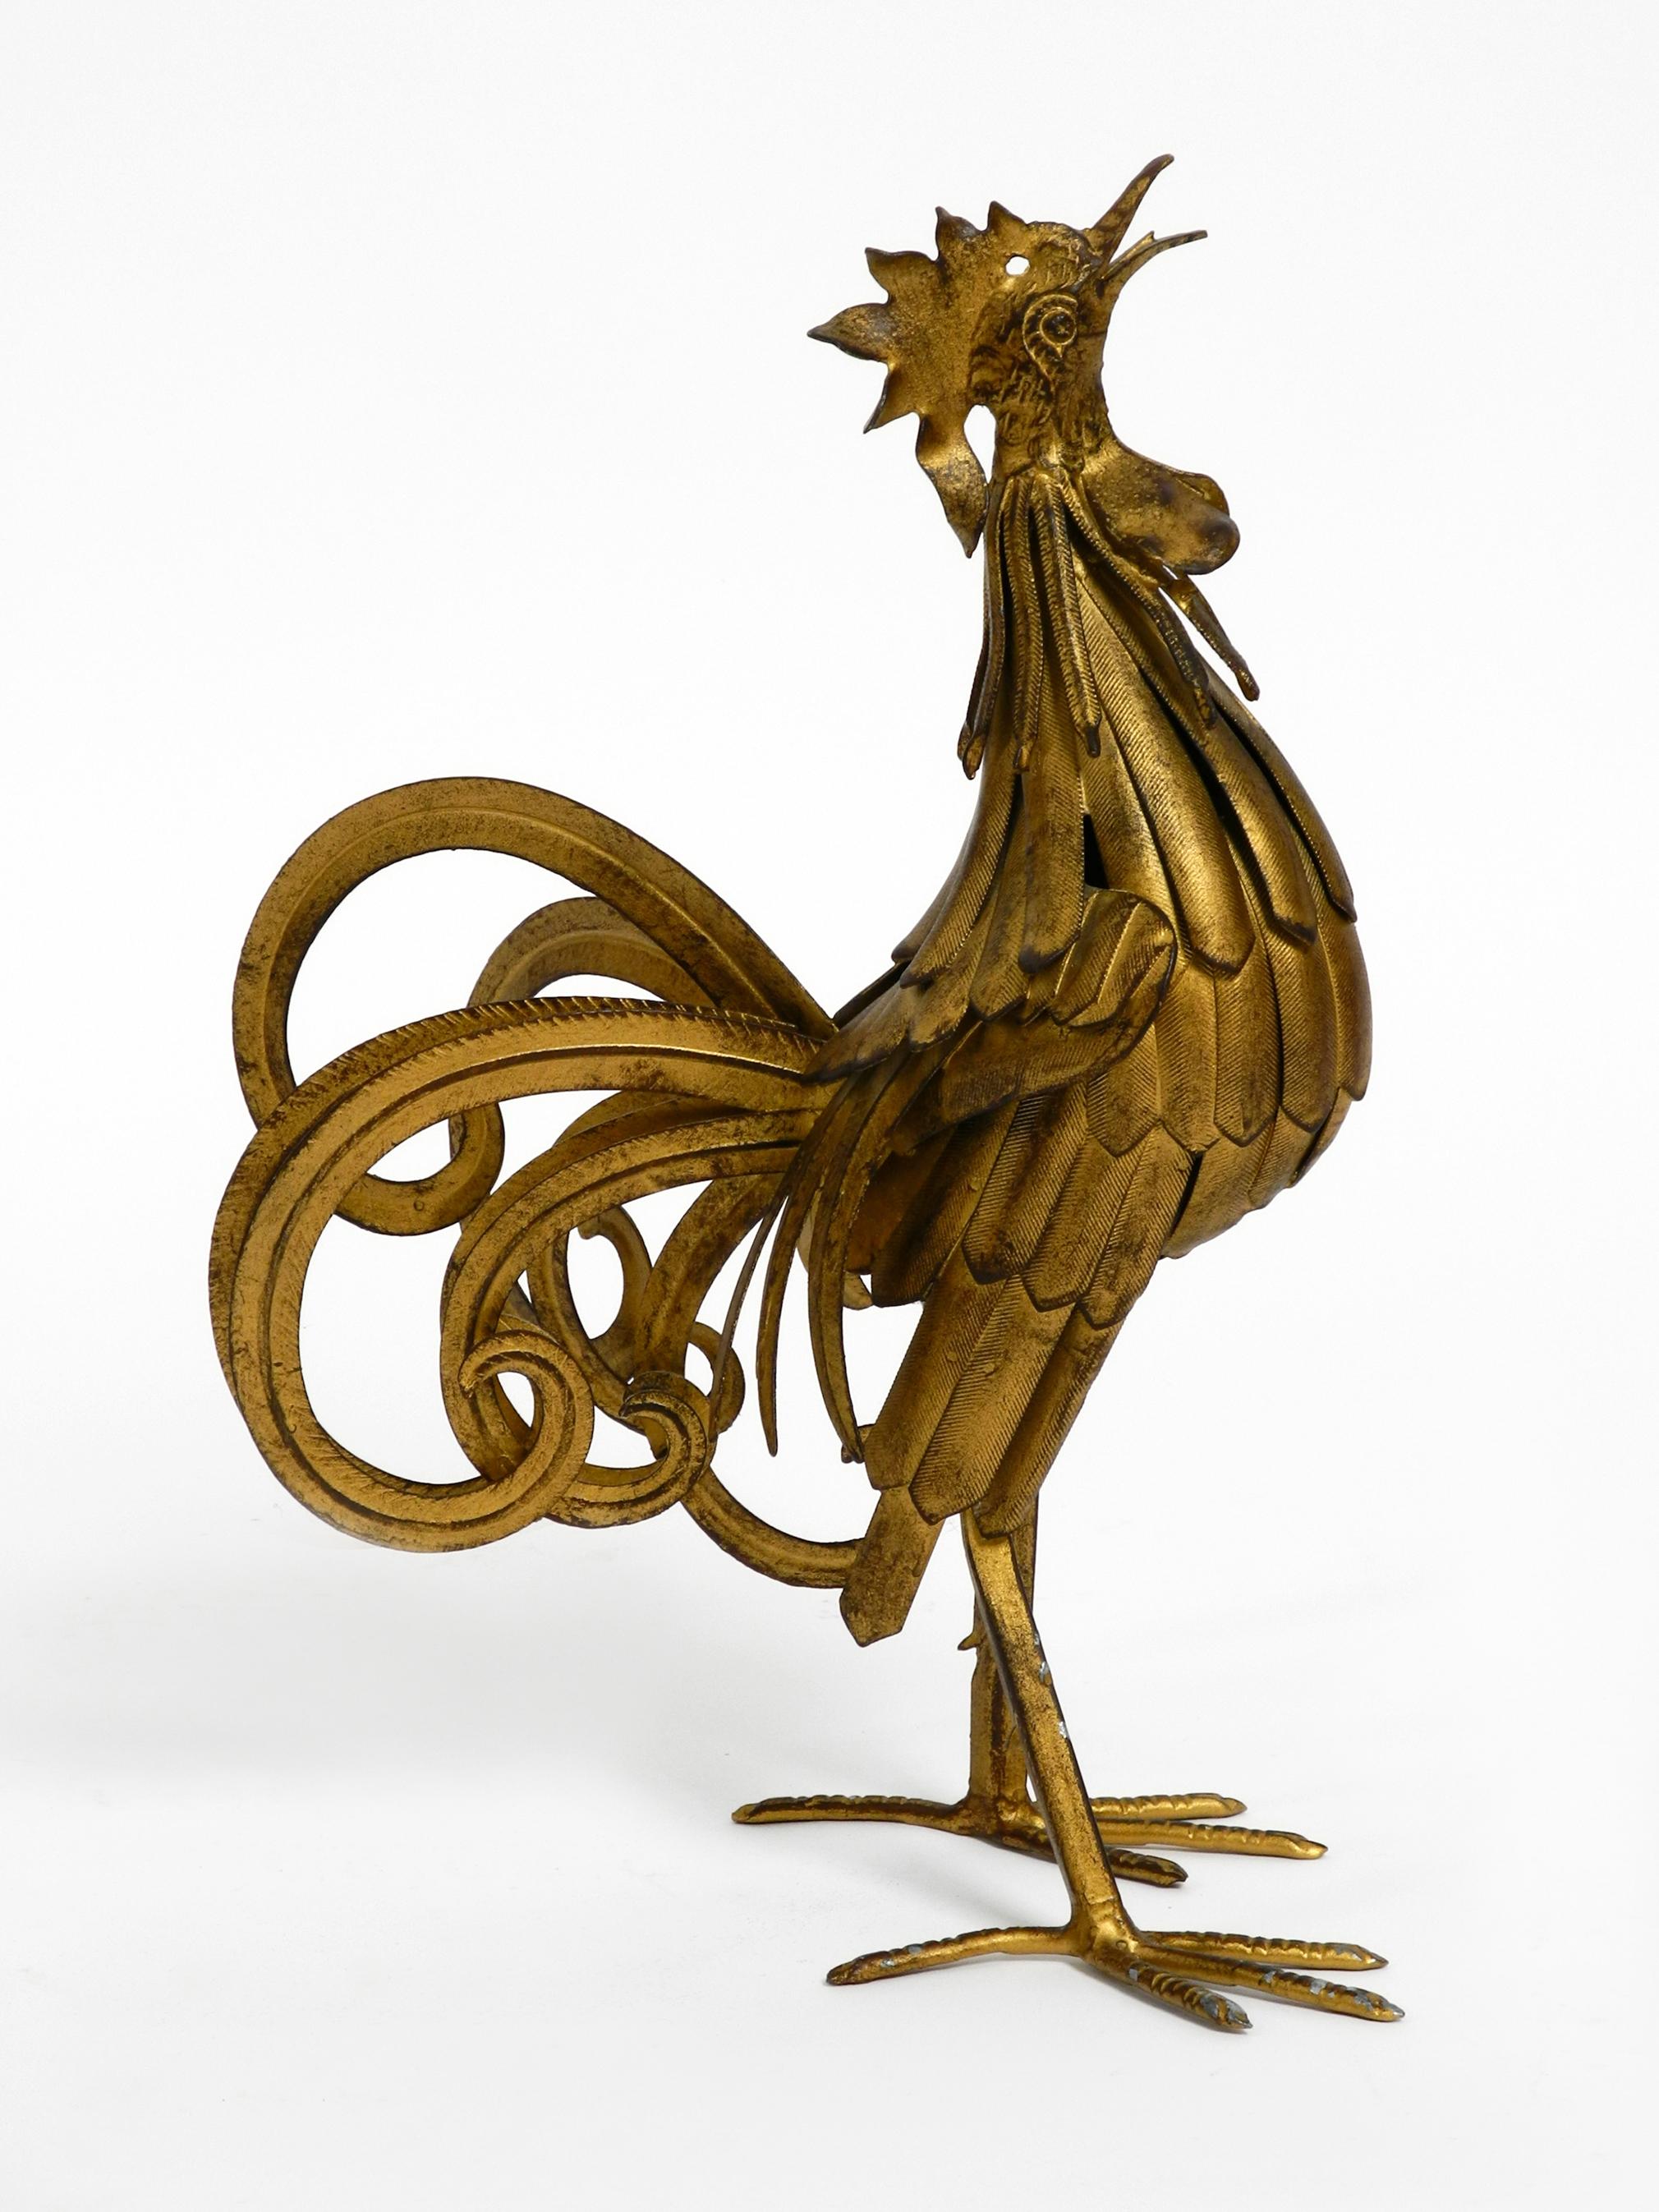 Very nice 1930s big heavy rooster as decoration.
Made in Germany. Made of solid metal anodized with brass.
Very good with lots of details. With a nice patina. 
No damages, nothing is missing or is shaky.
Great decoration for all residential